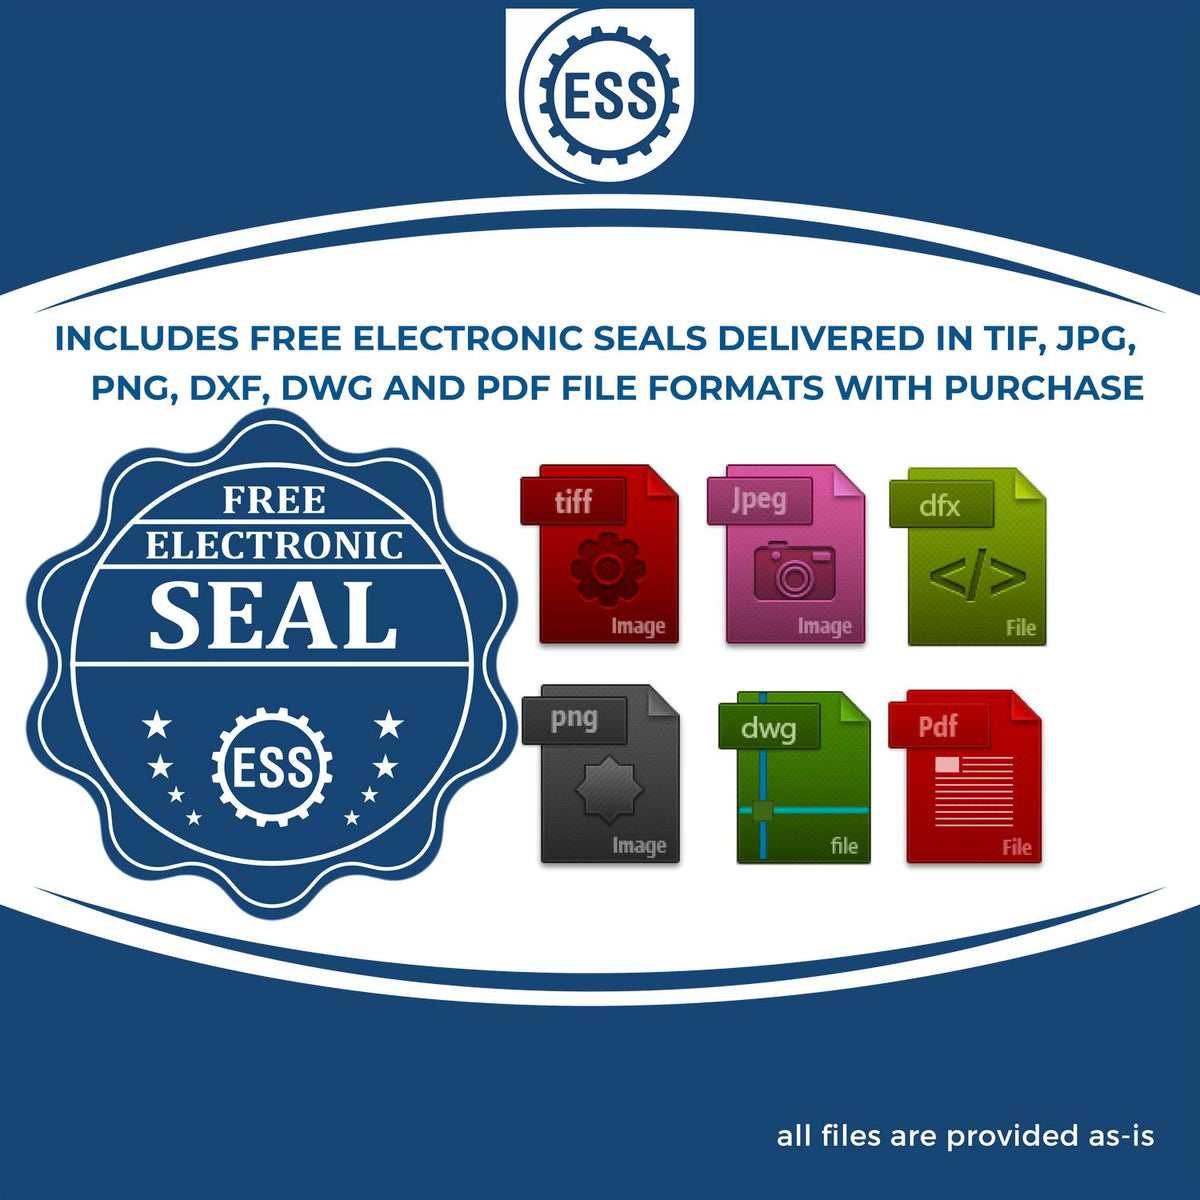 An infographic for the free electronic seal for the State of Minnesota Extended Long Reach Engineer Seal illustrating the different file type icons such as DXF, DWG, TIF, JPG and PNG.